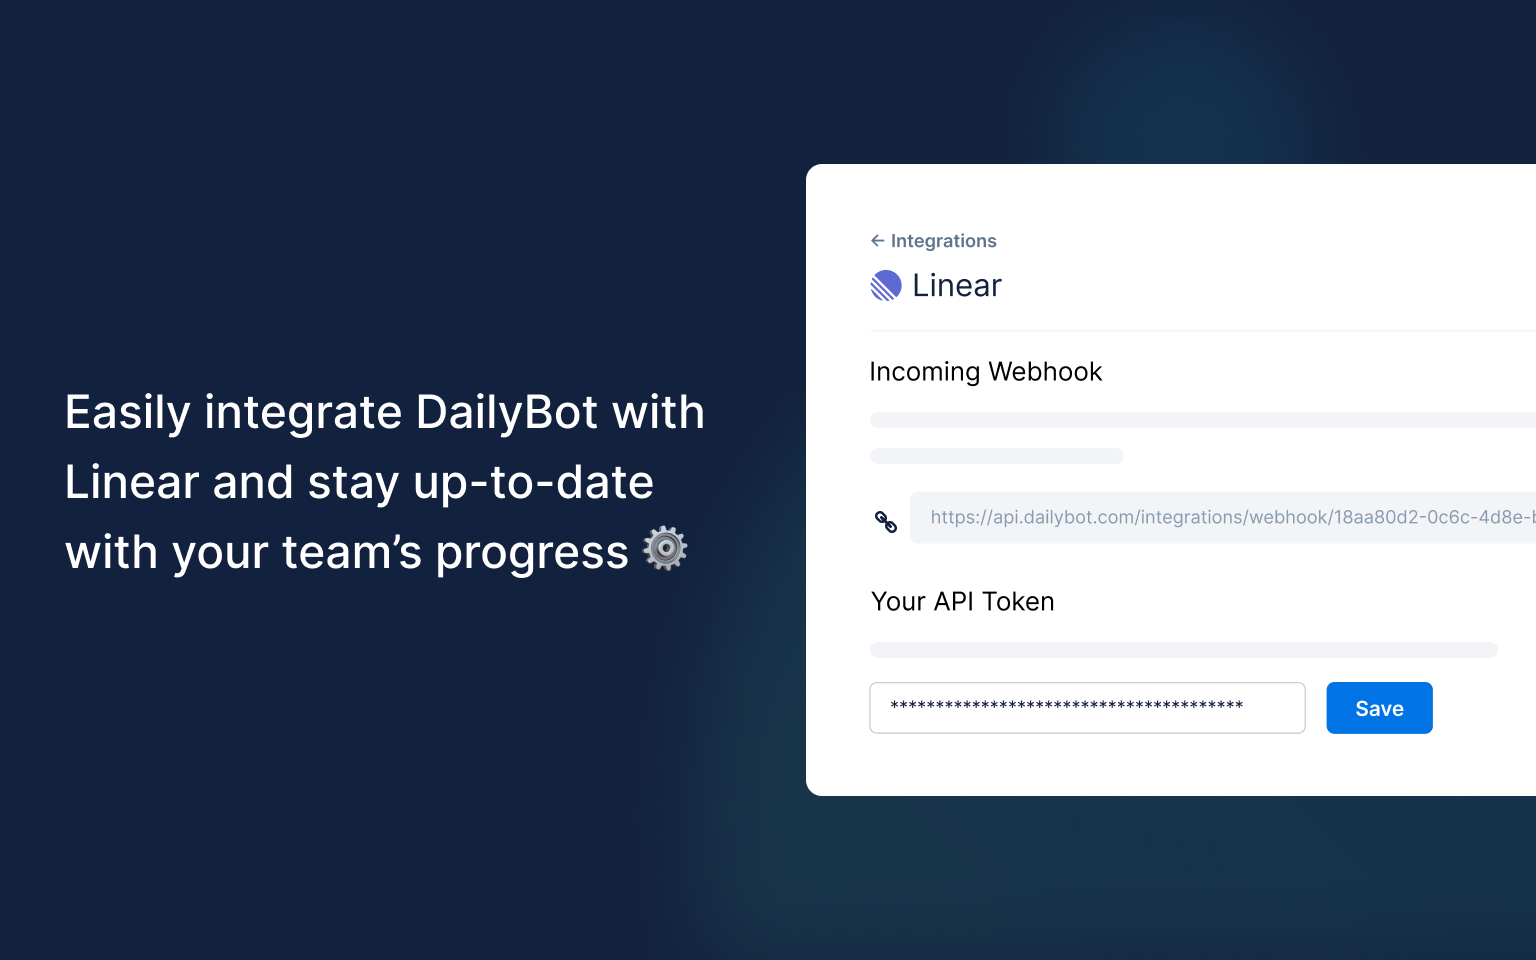 Dailybot configration page showing incoming webook and api token settings